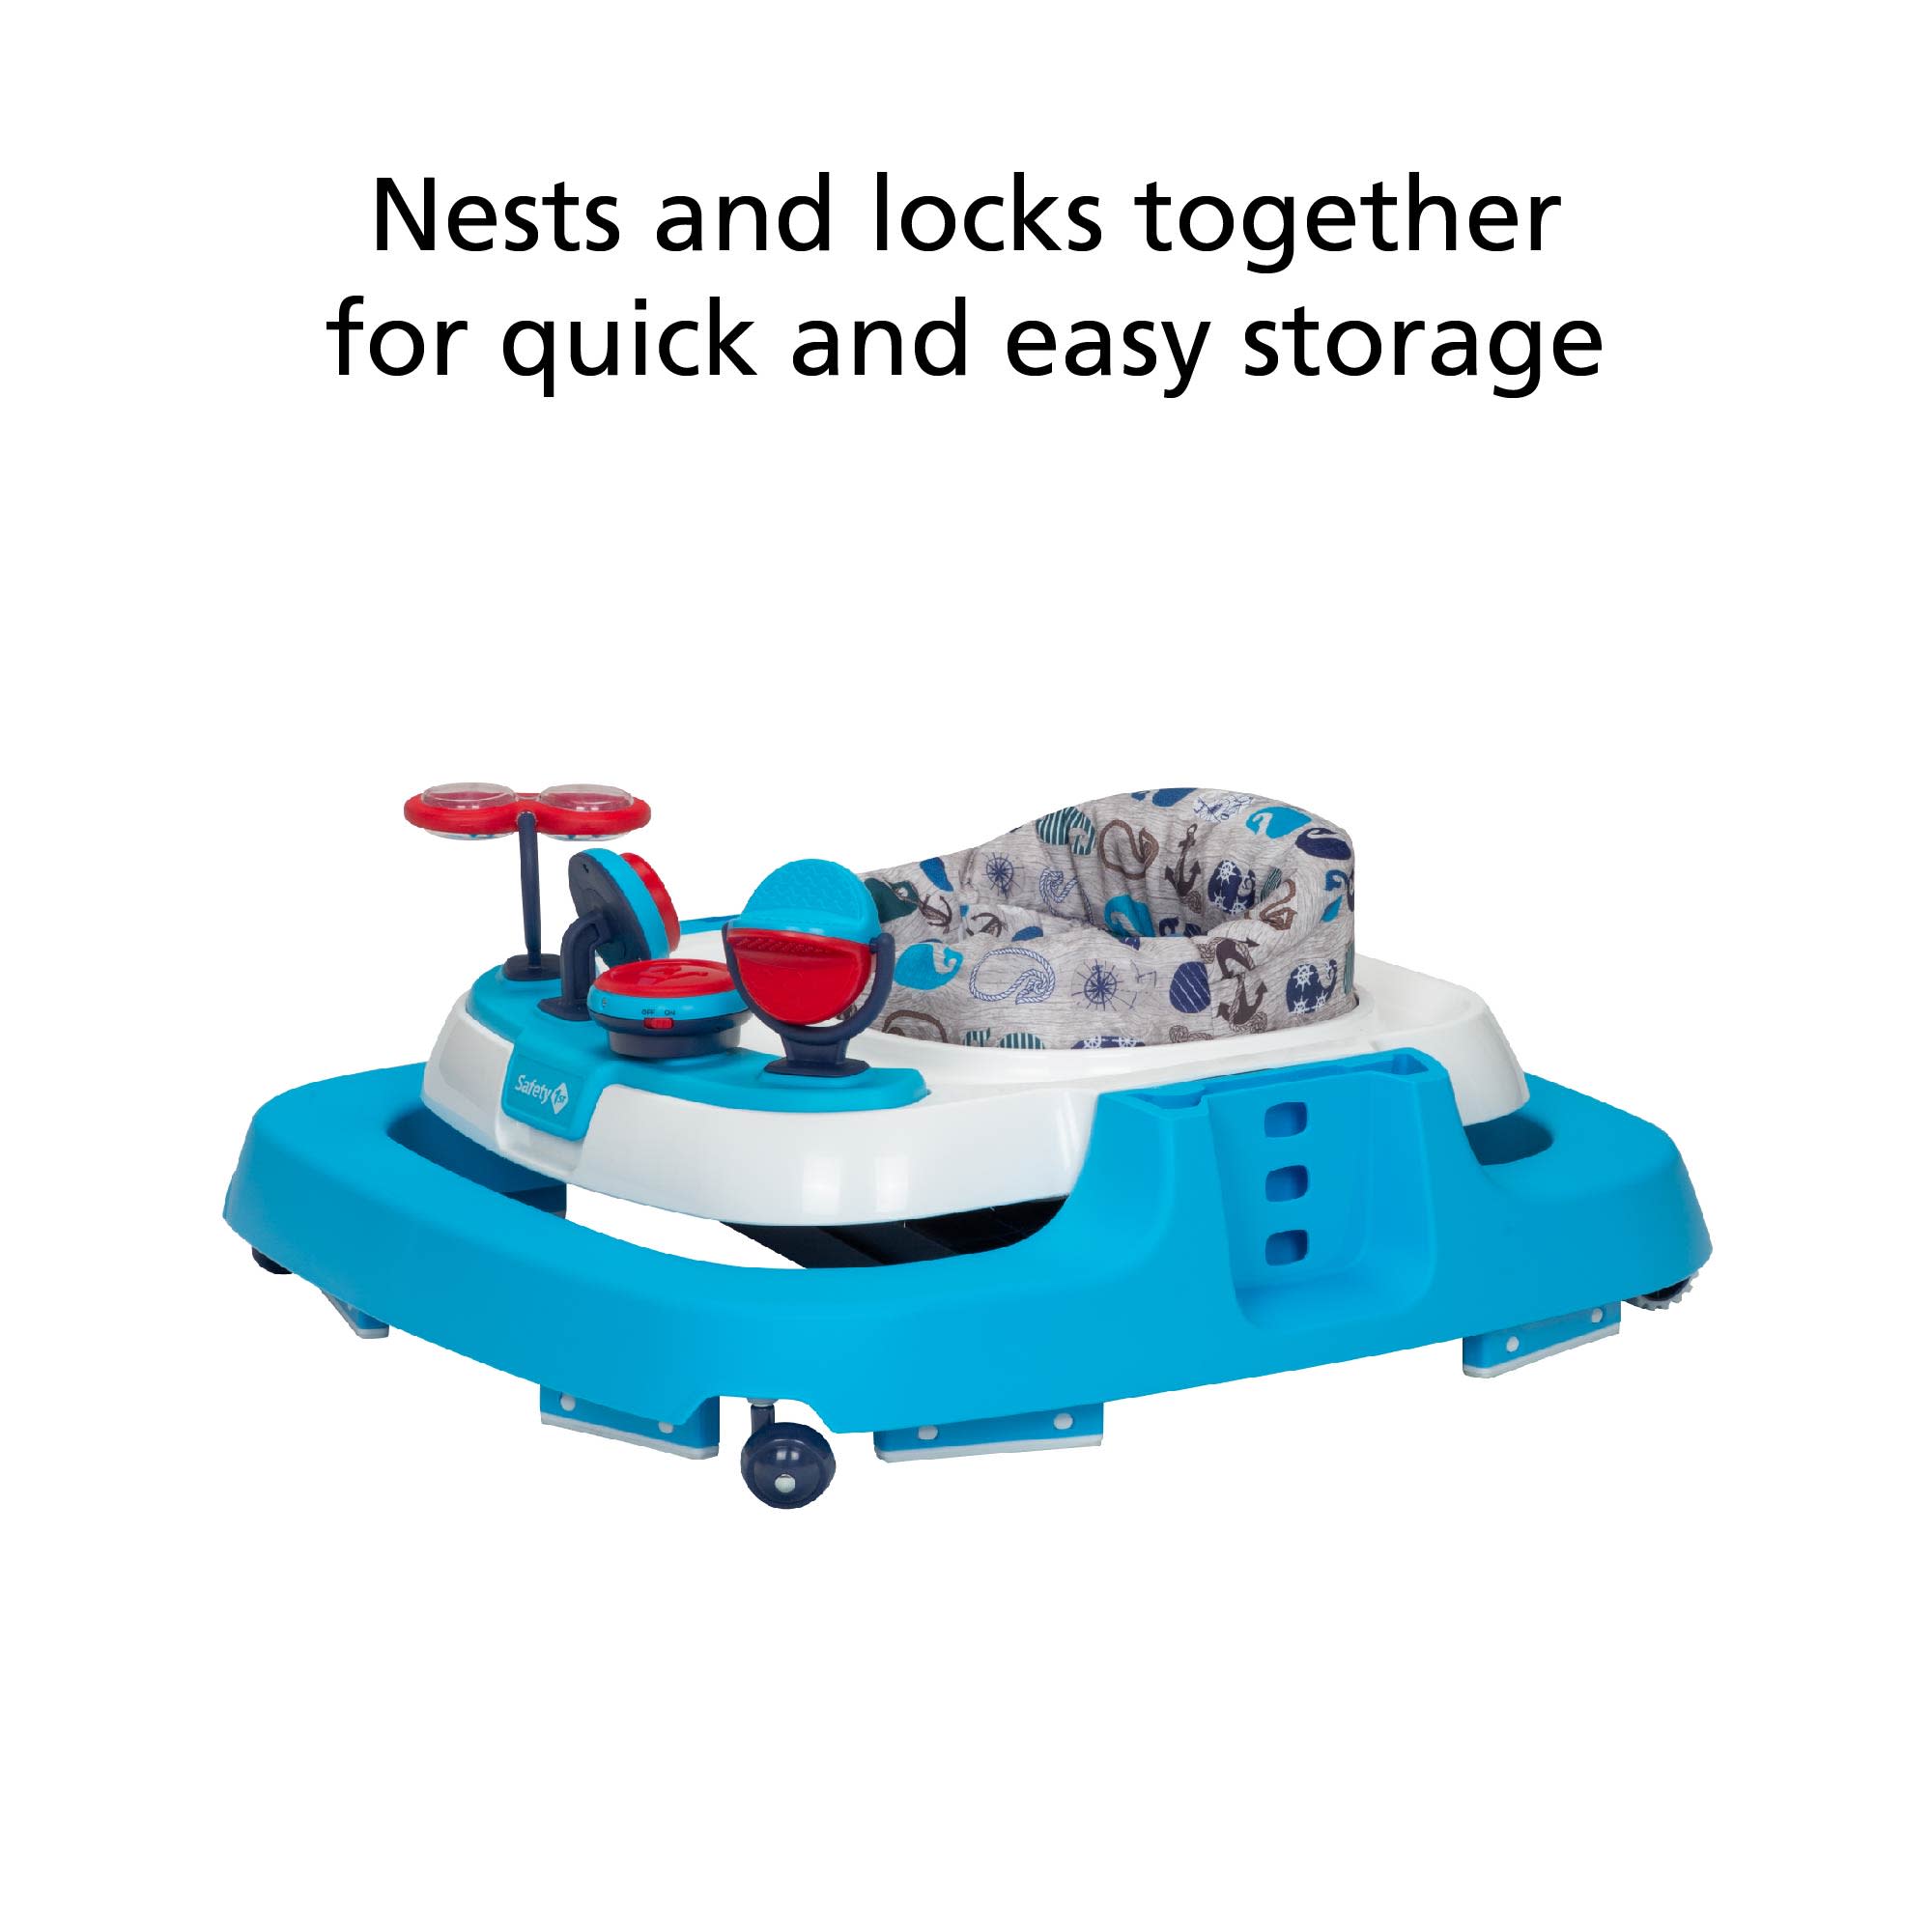 Ready, Set, Walk! DX Developmental Walker - nests and locks together for quick and easy storage